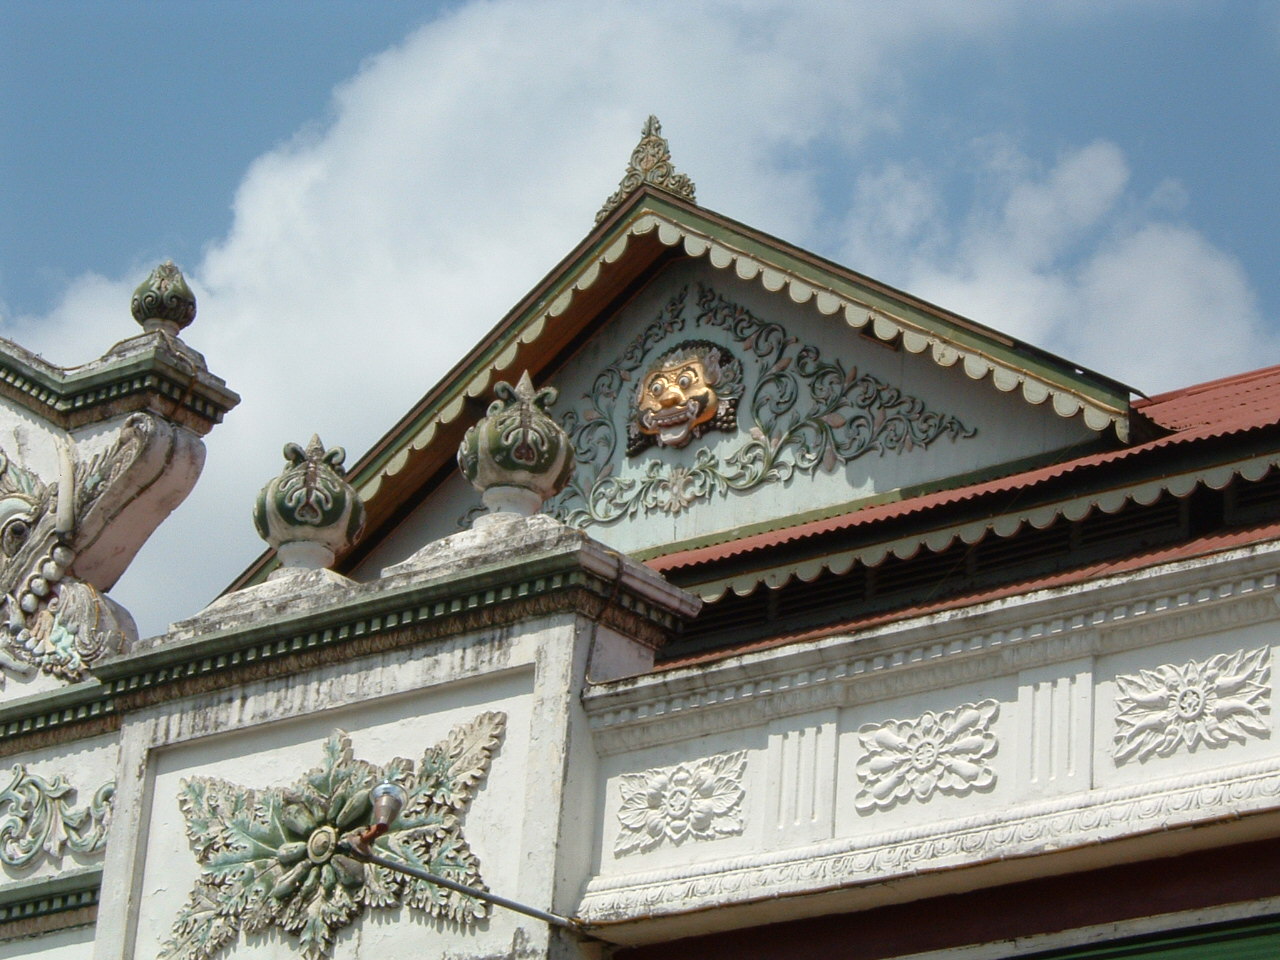 Detail view of the gable roofing the entrance to the Pagelaran Pavilion